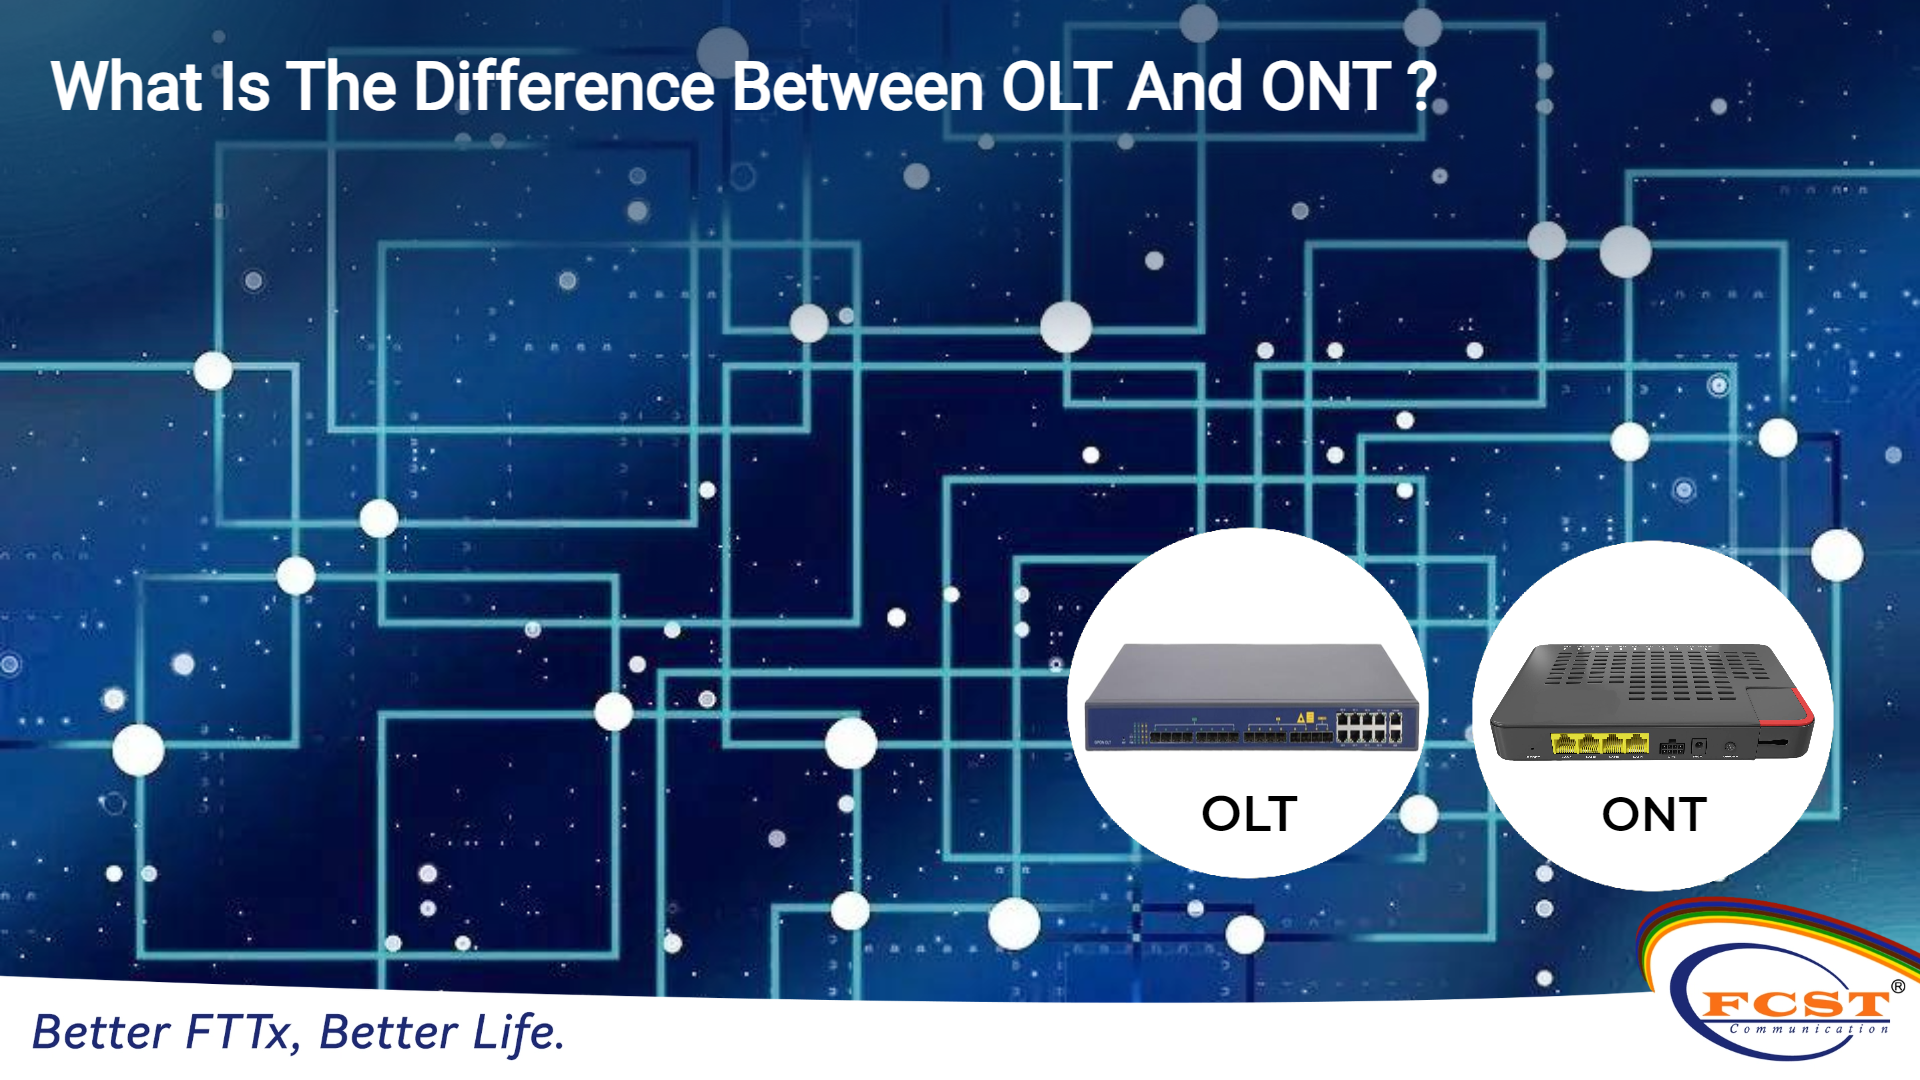 What is the difference between OLT and ONT?